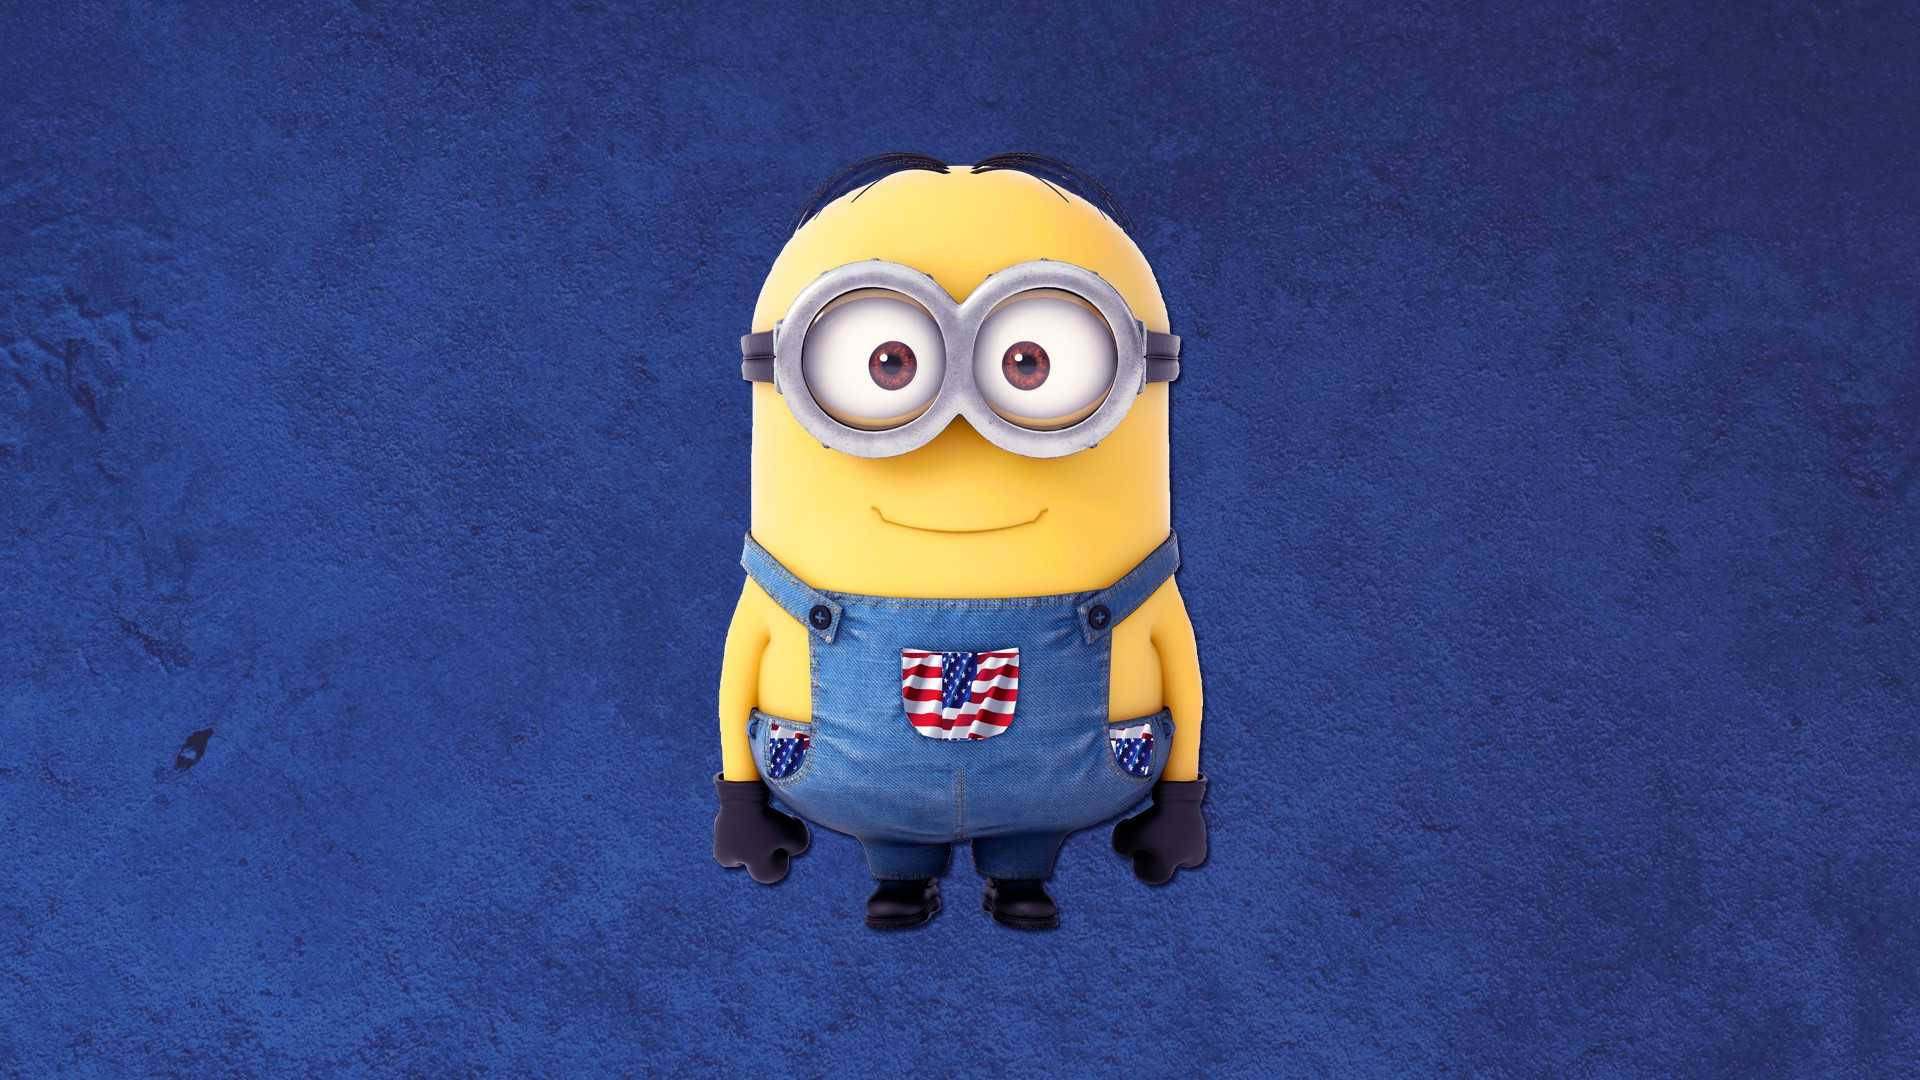 Minion Desktop In Overall With American Flag Wallpaper